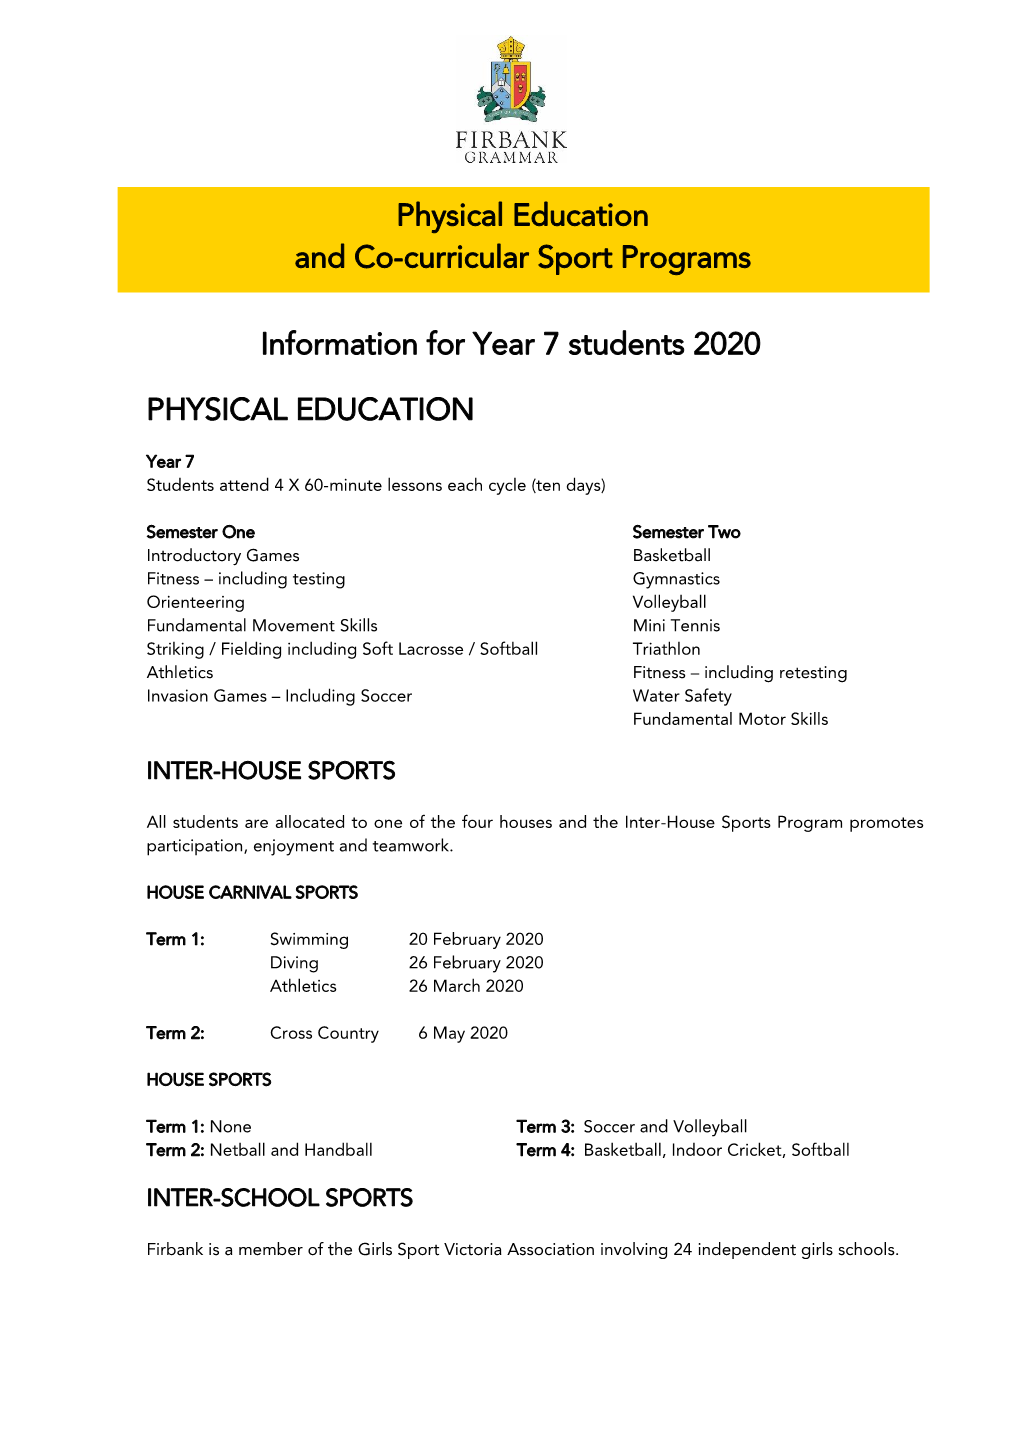 Information for Year 7 Students 2020 PHYSICAL EDUCATION Physical